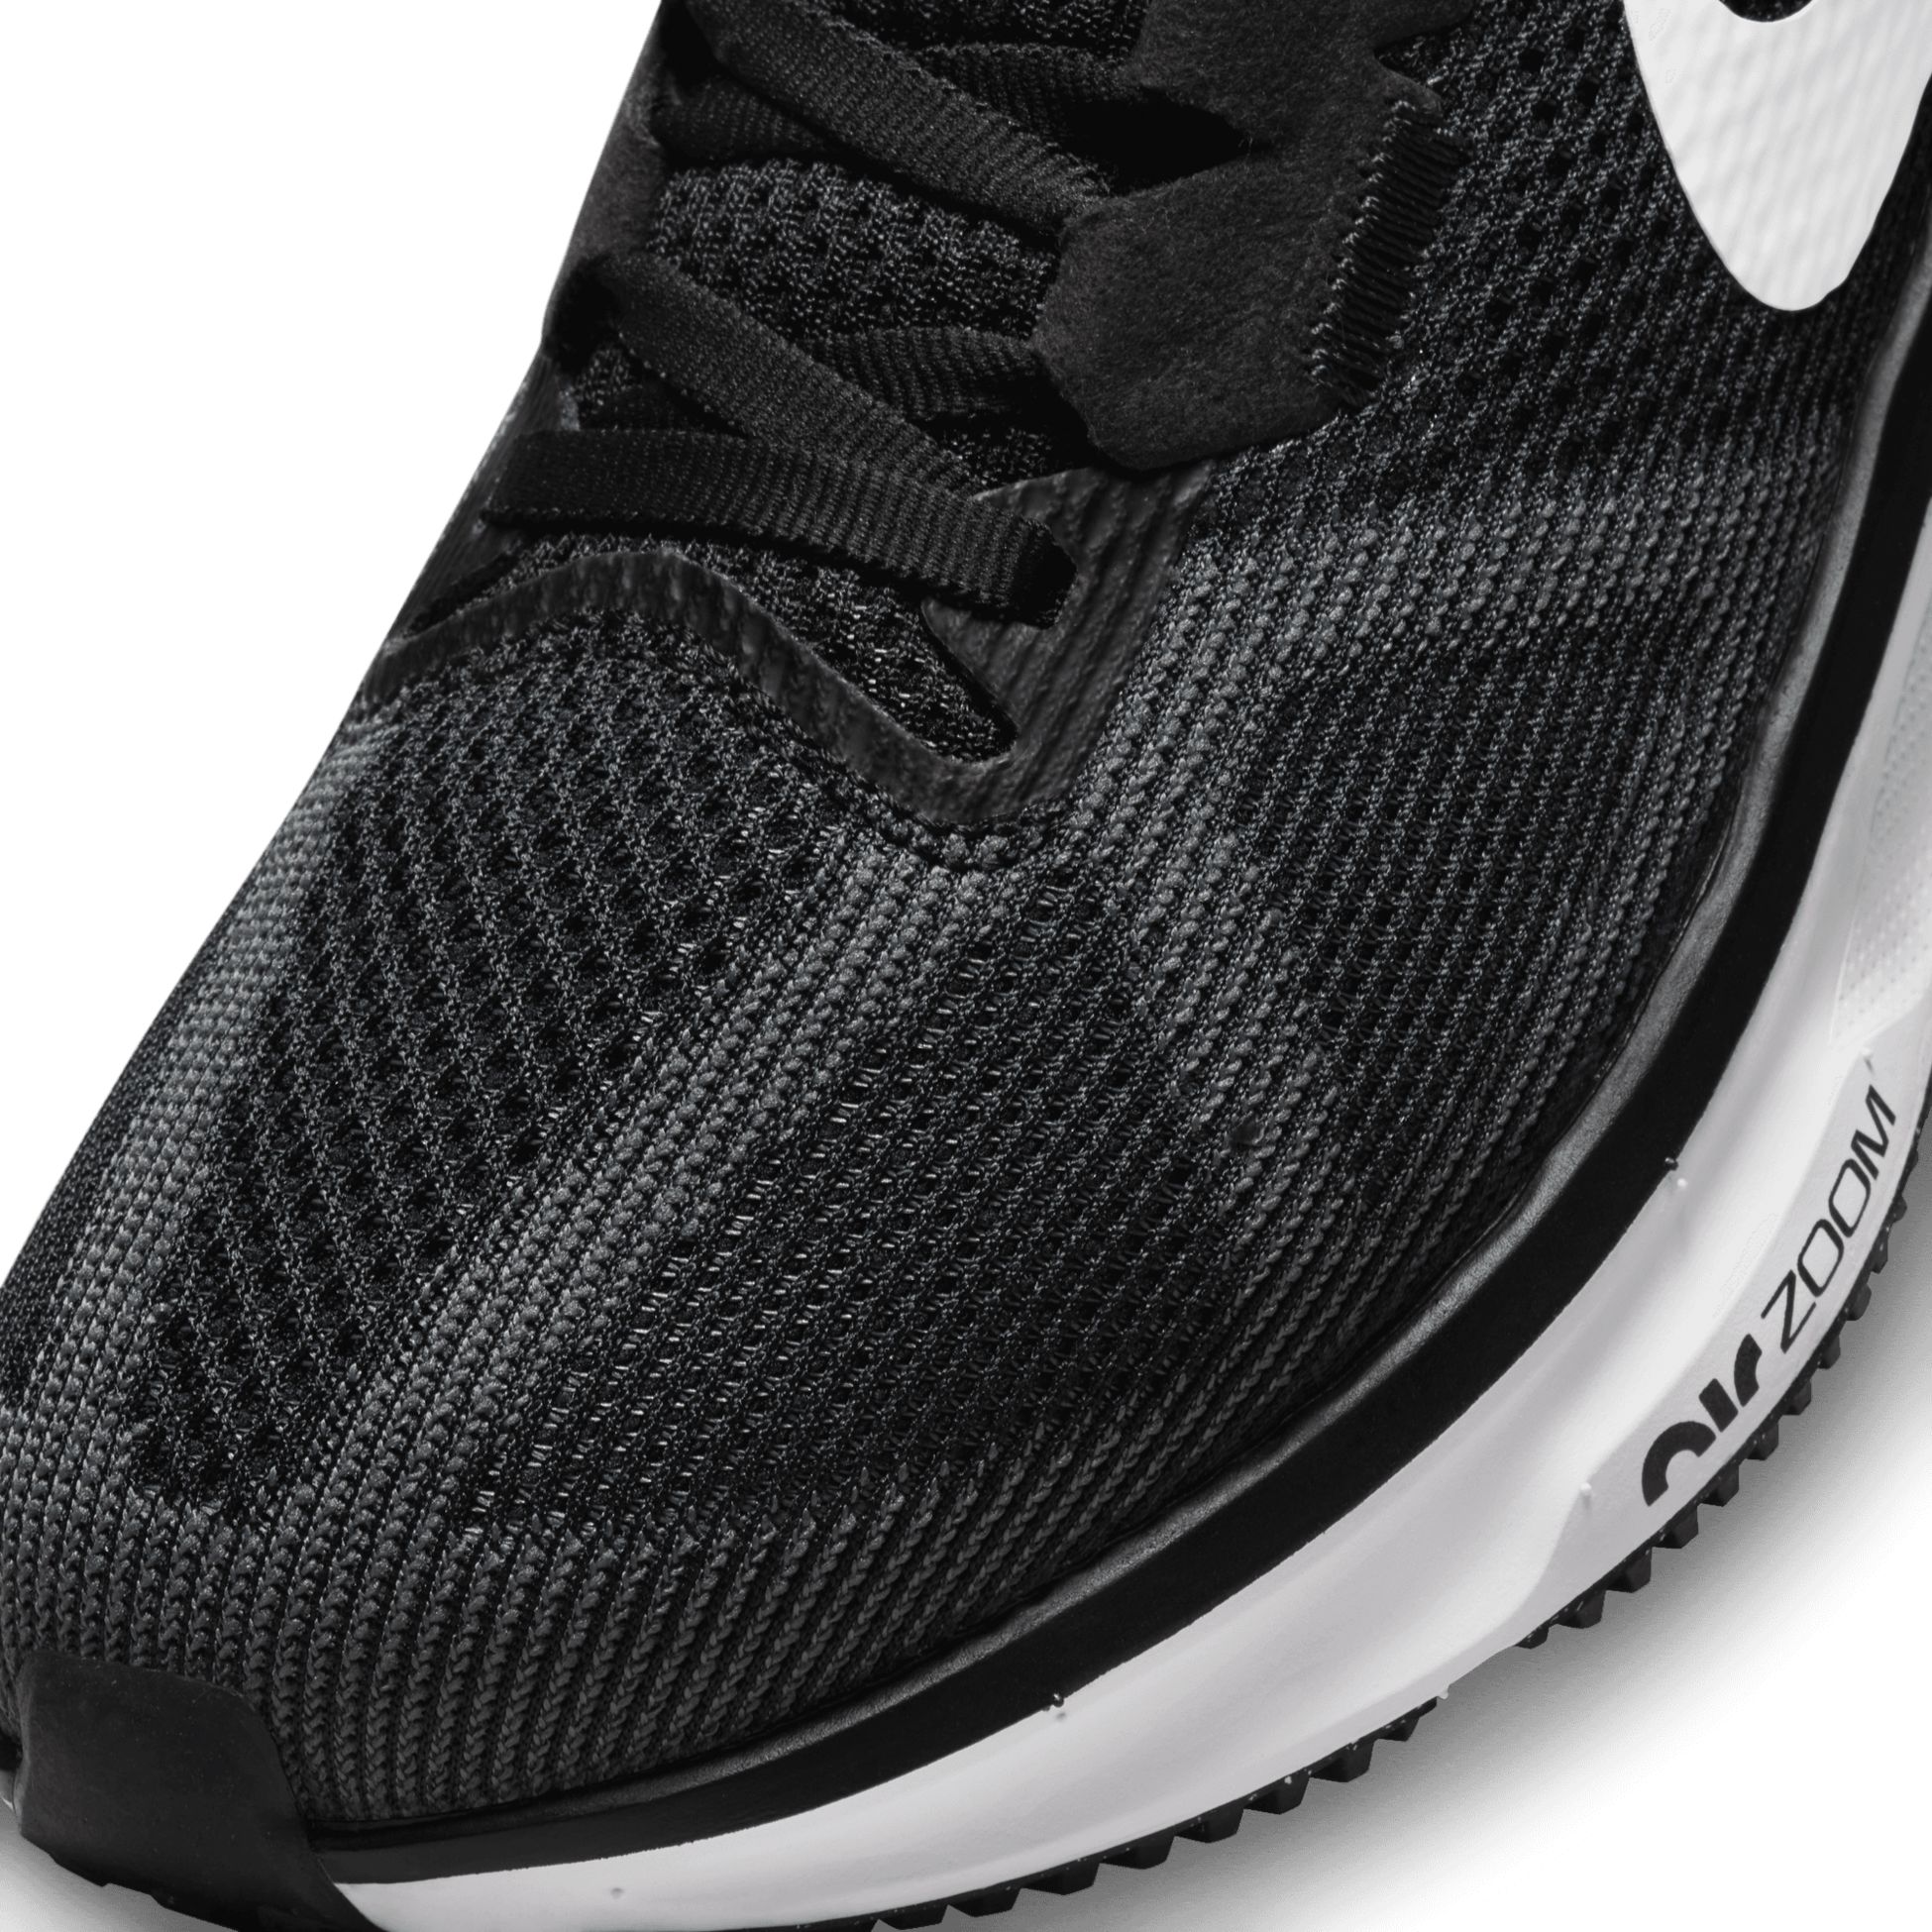 NIKE, W NIKE AIR ZOOM STRUCTURE 25